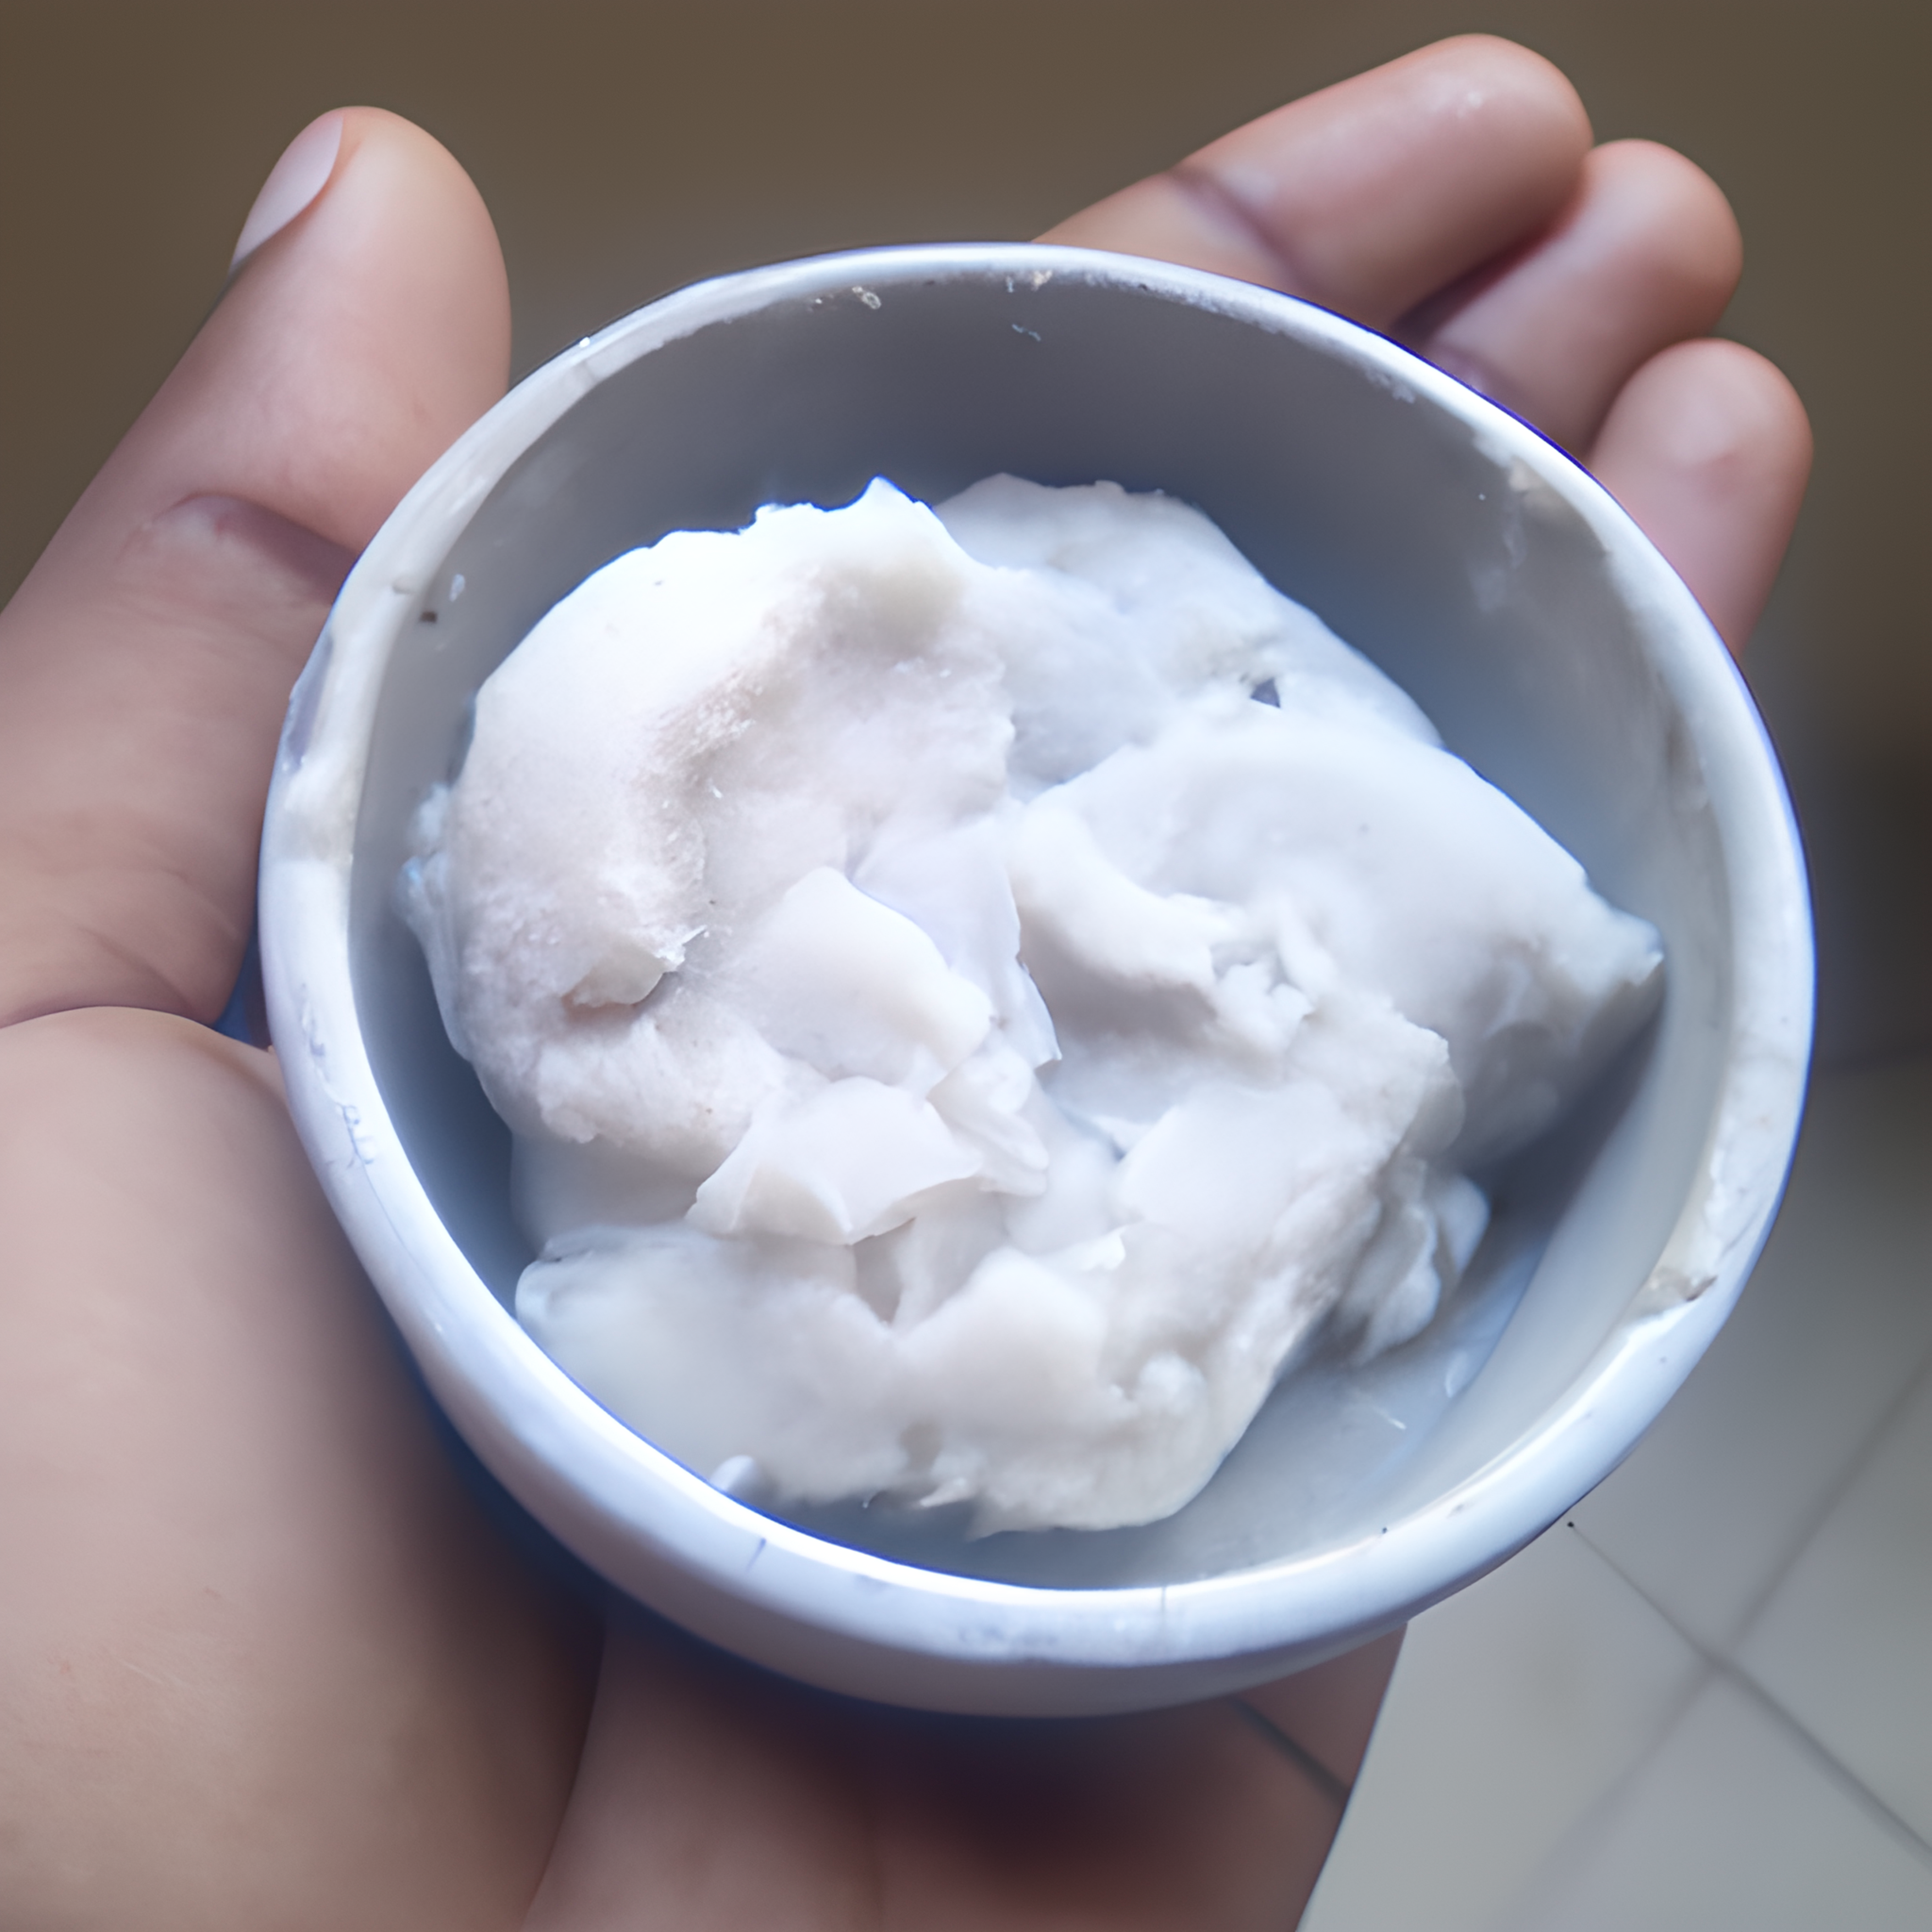 Small bowl of shea butter in hand